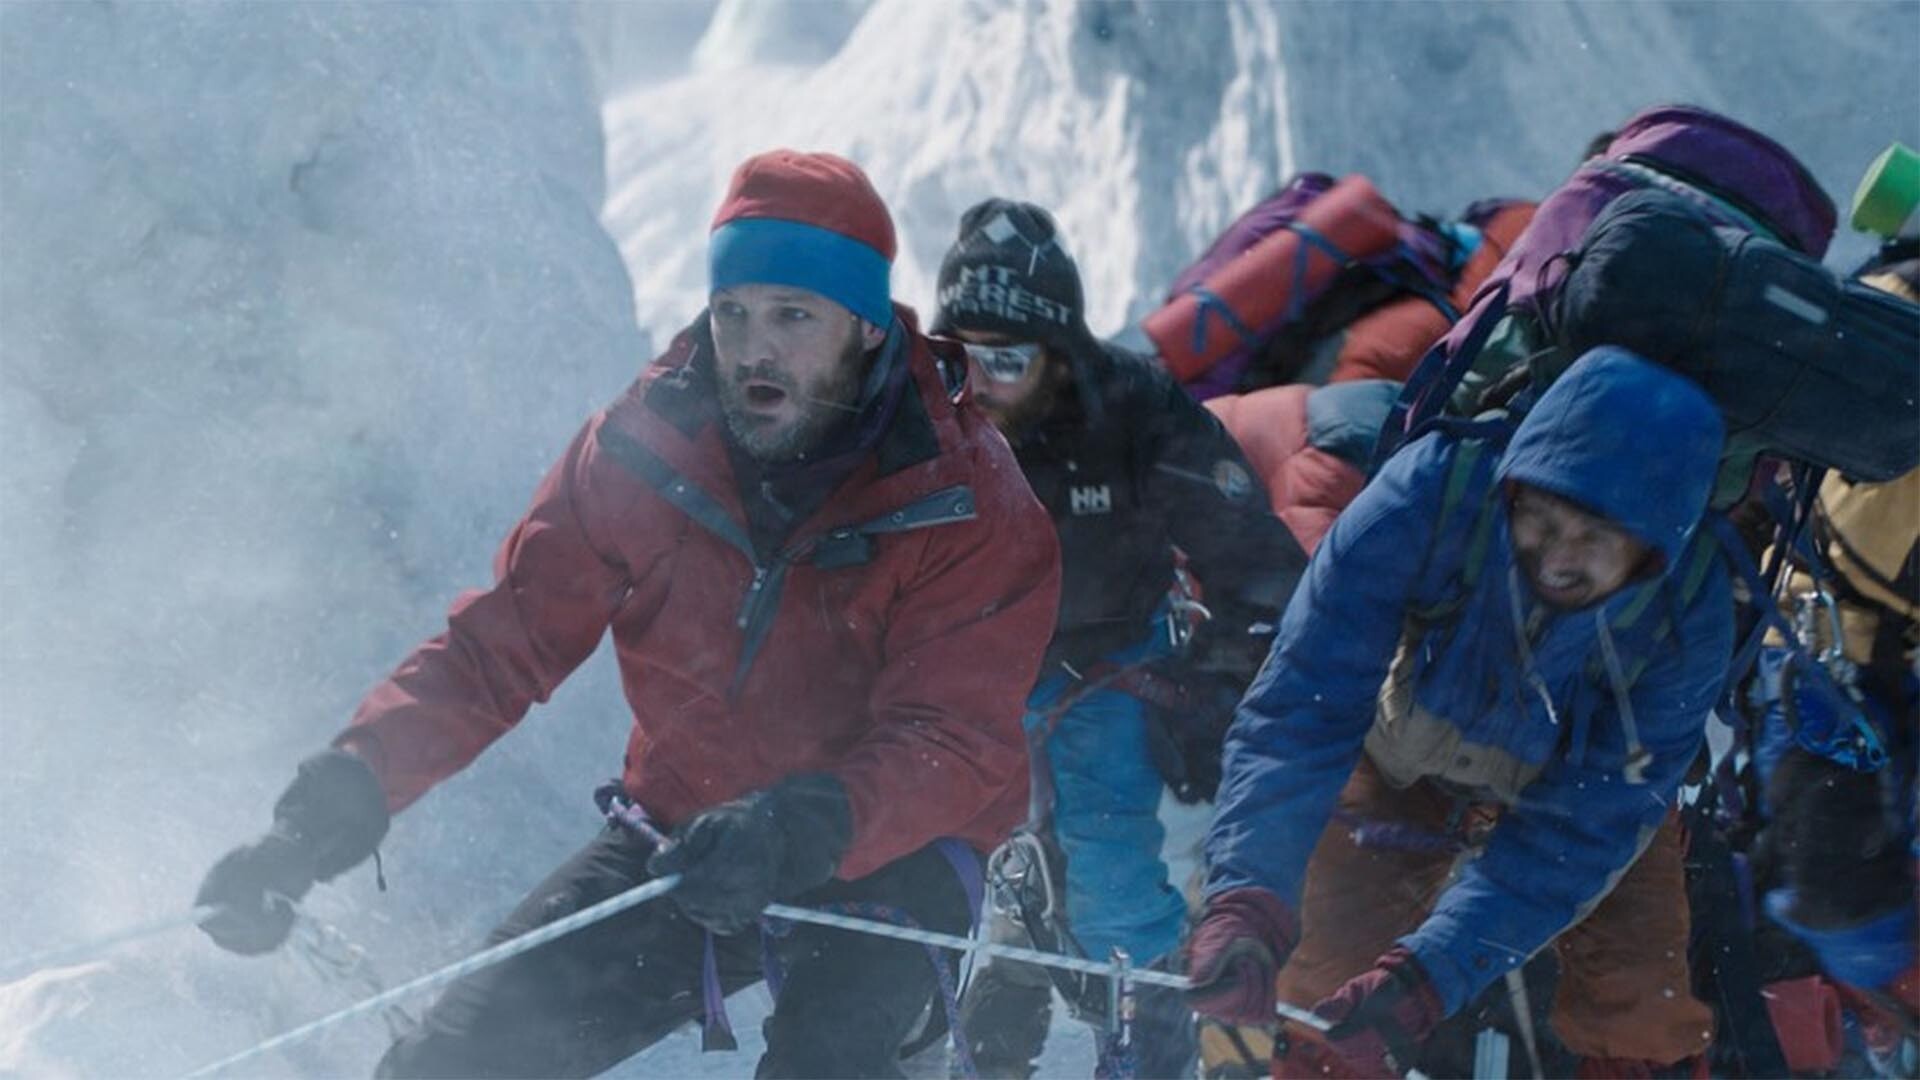 Everest (Movie 2015): A 2015 film based on the real events that took place in the Himalayas in 1996. 1920x1080 Full HD Wallpaper.